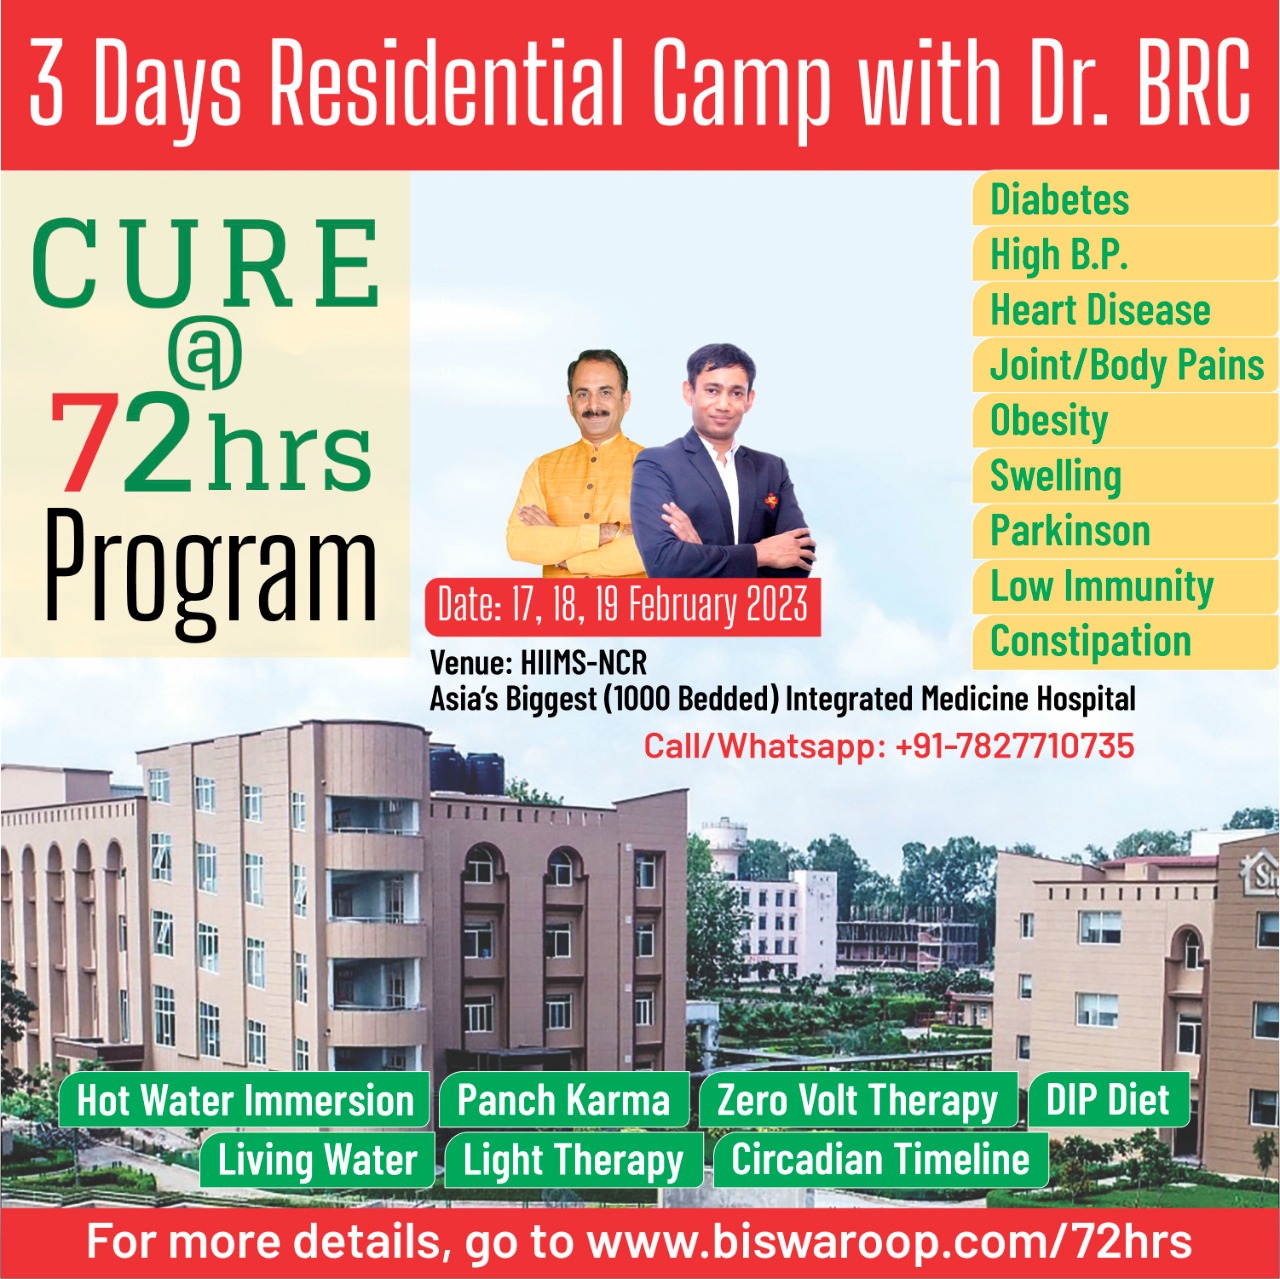 3 Days Residential camp